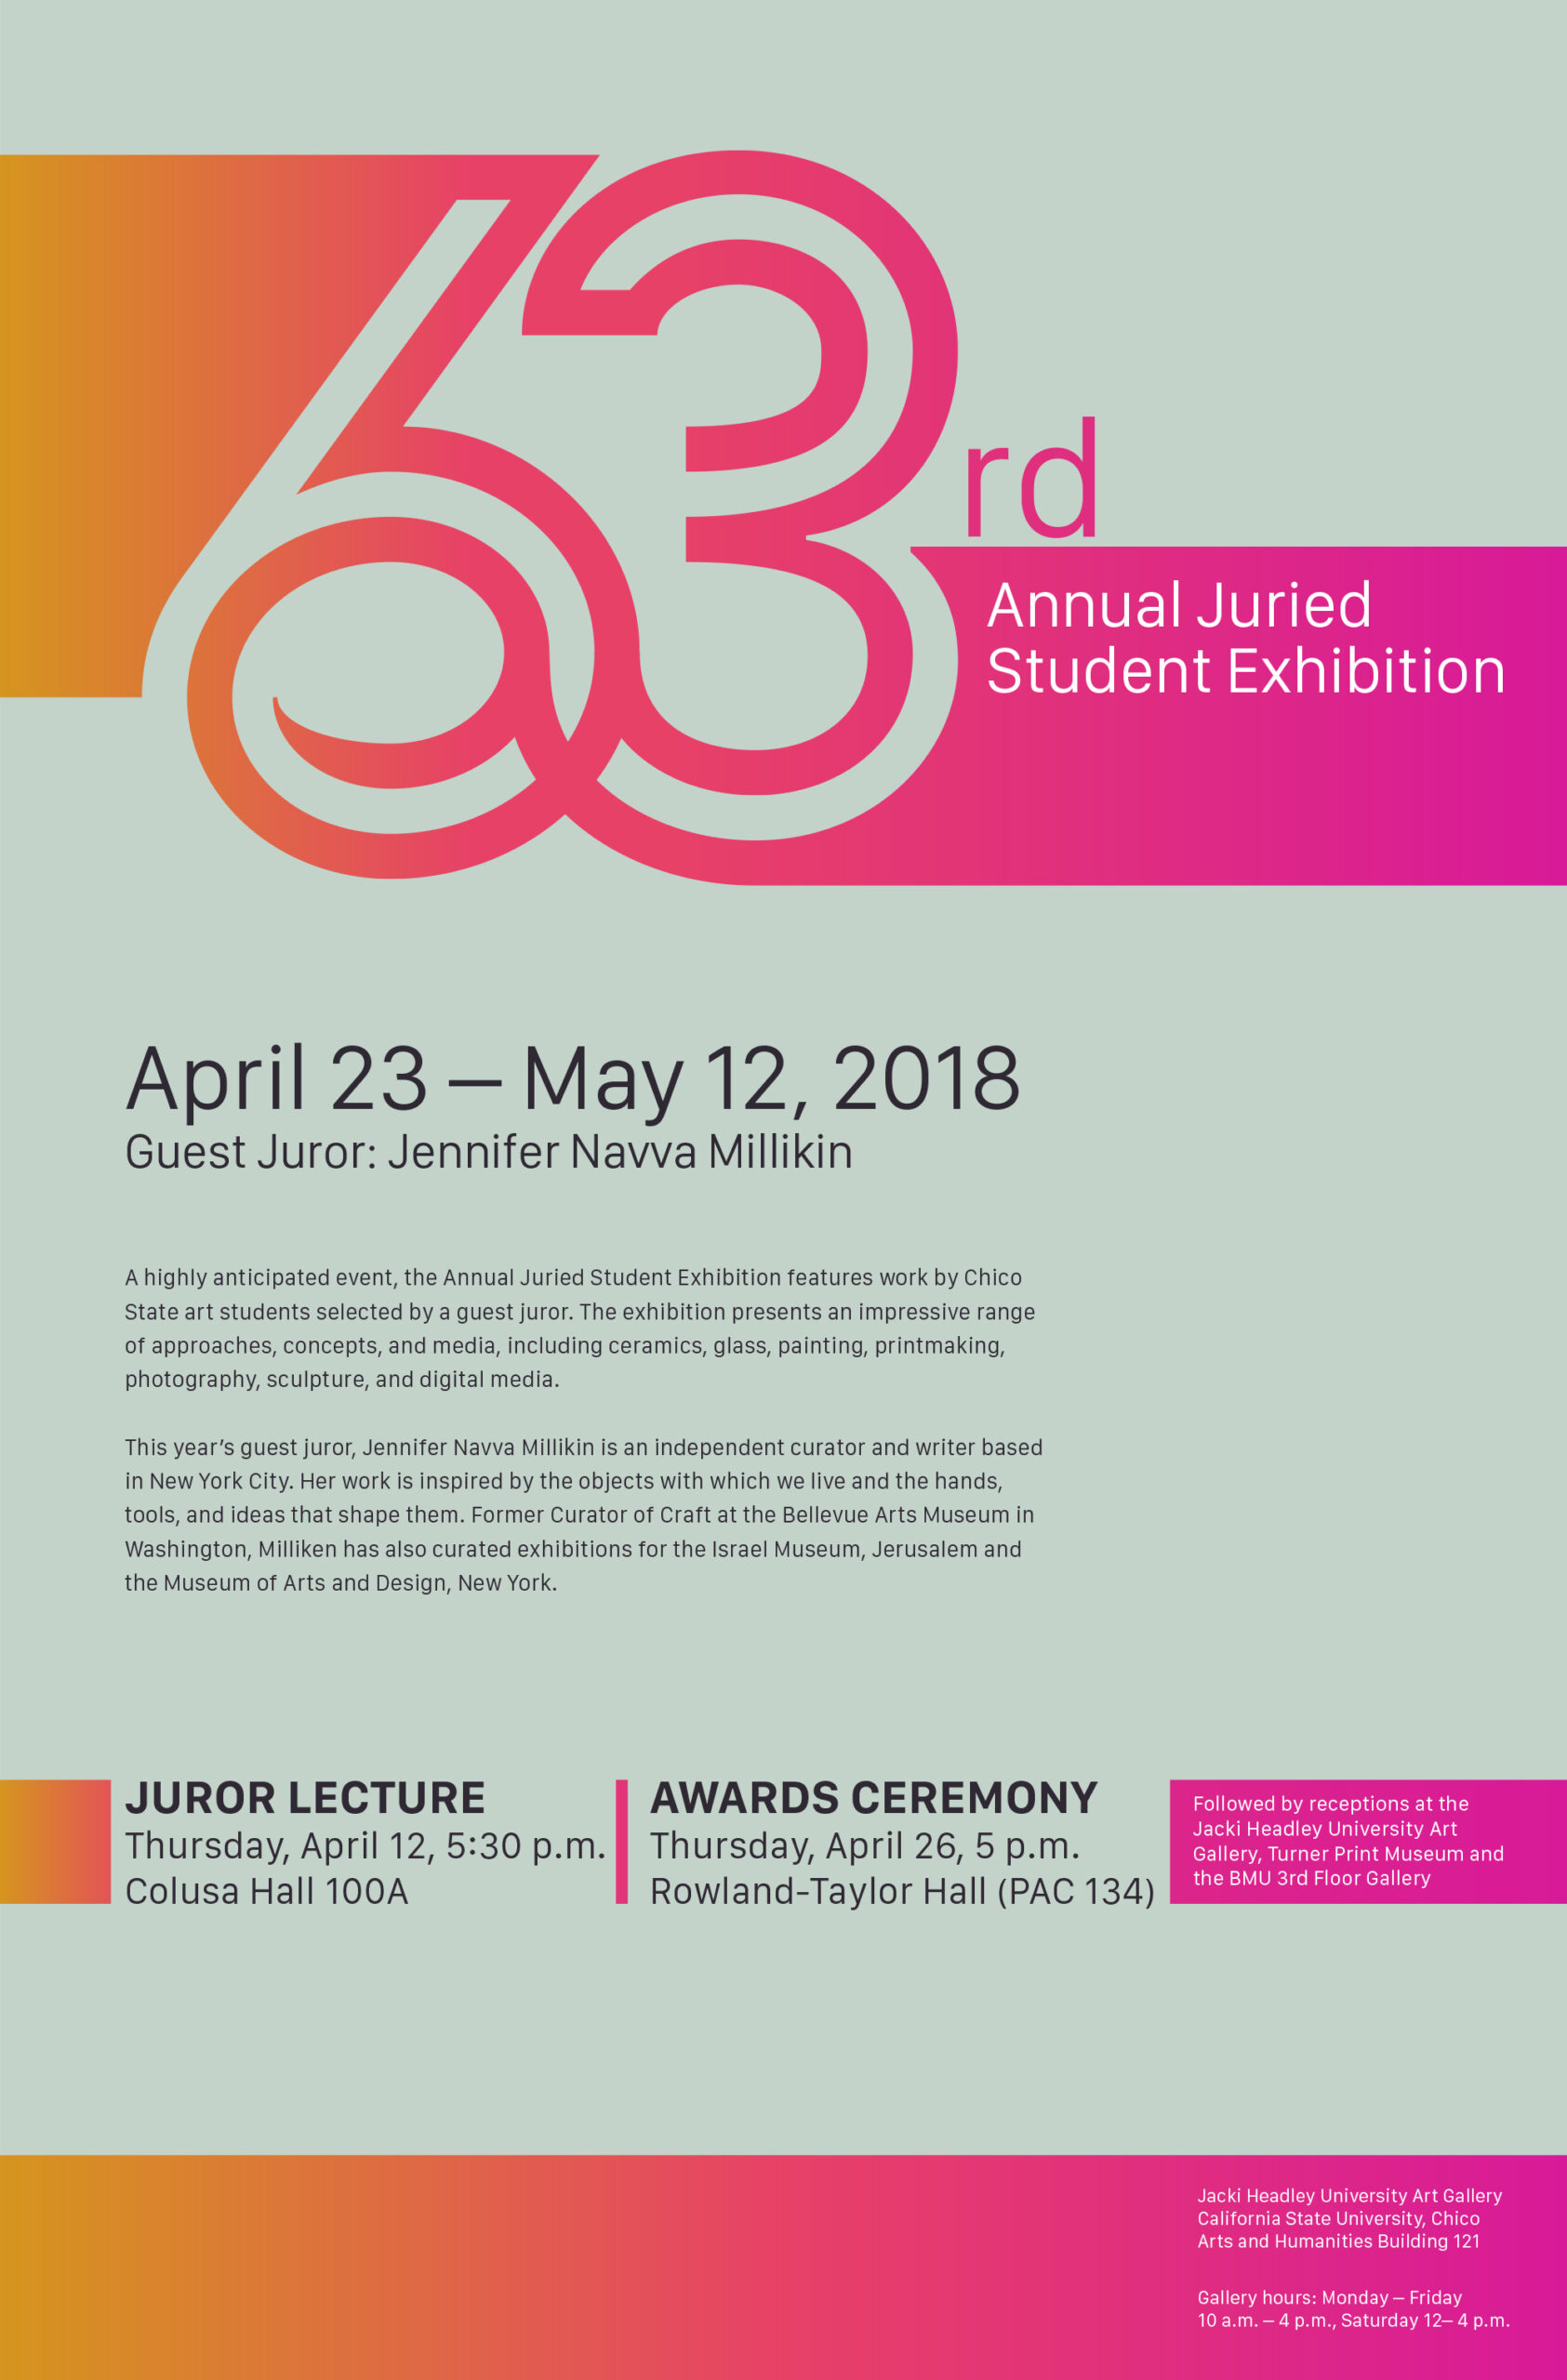 Art Department 63rd Annual Juried Student Exhibition poster